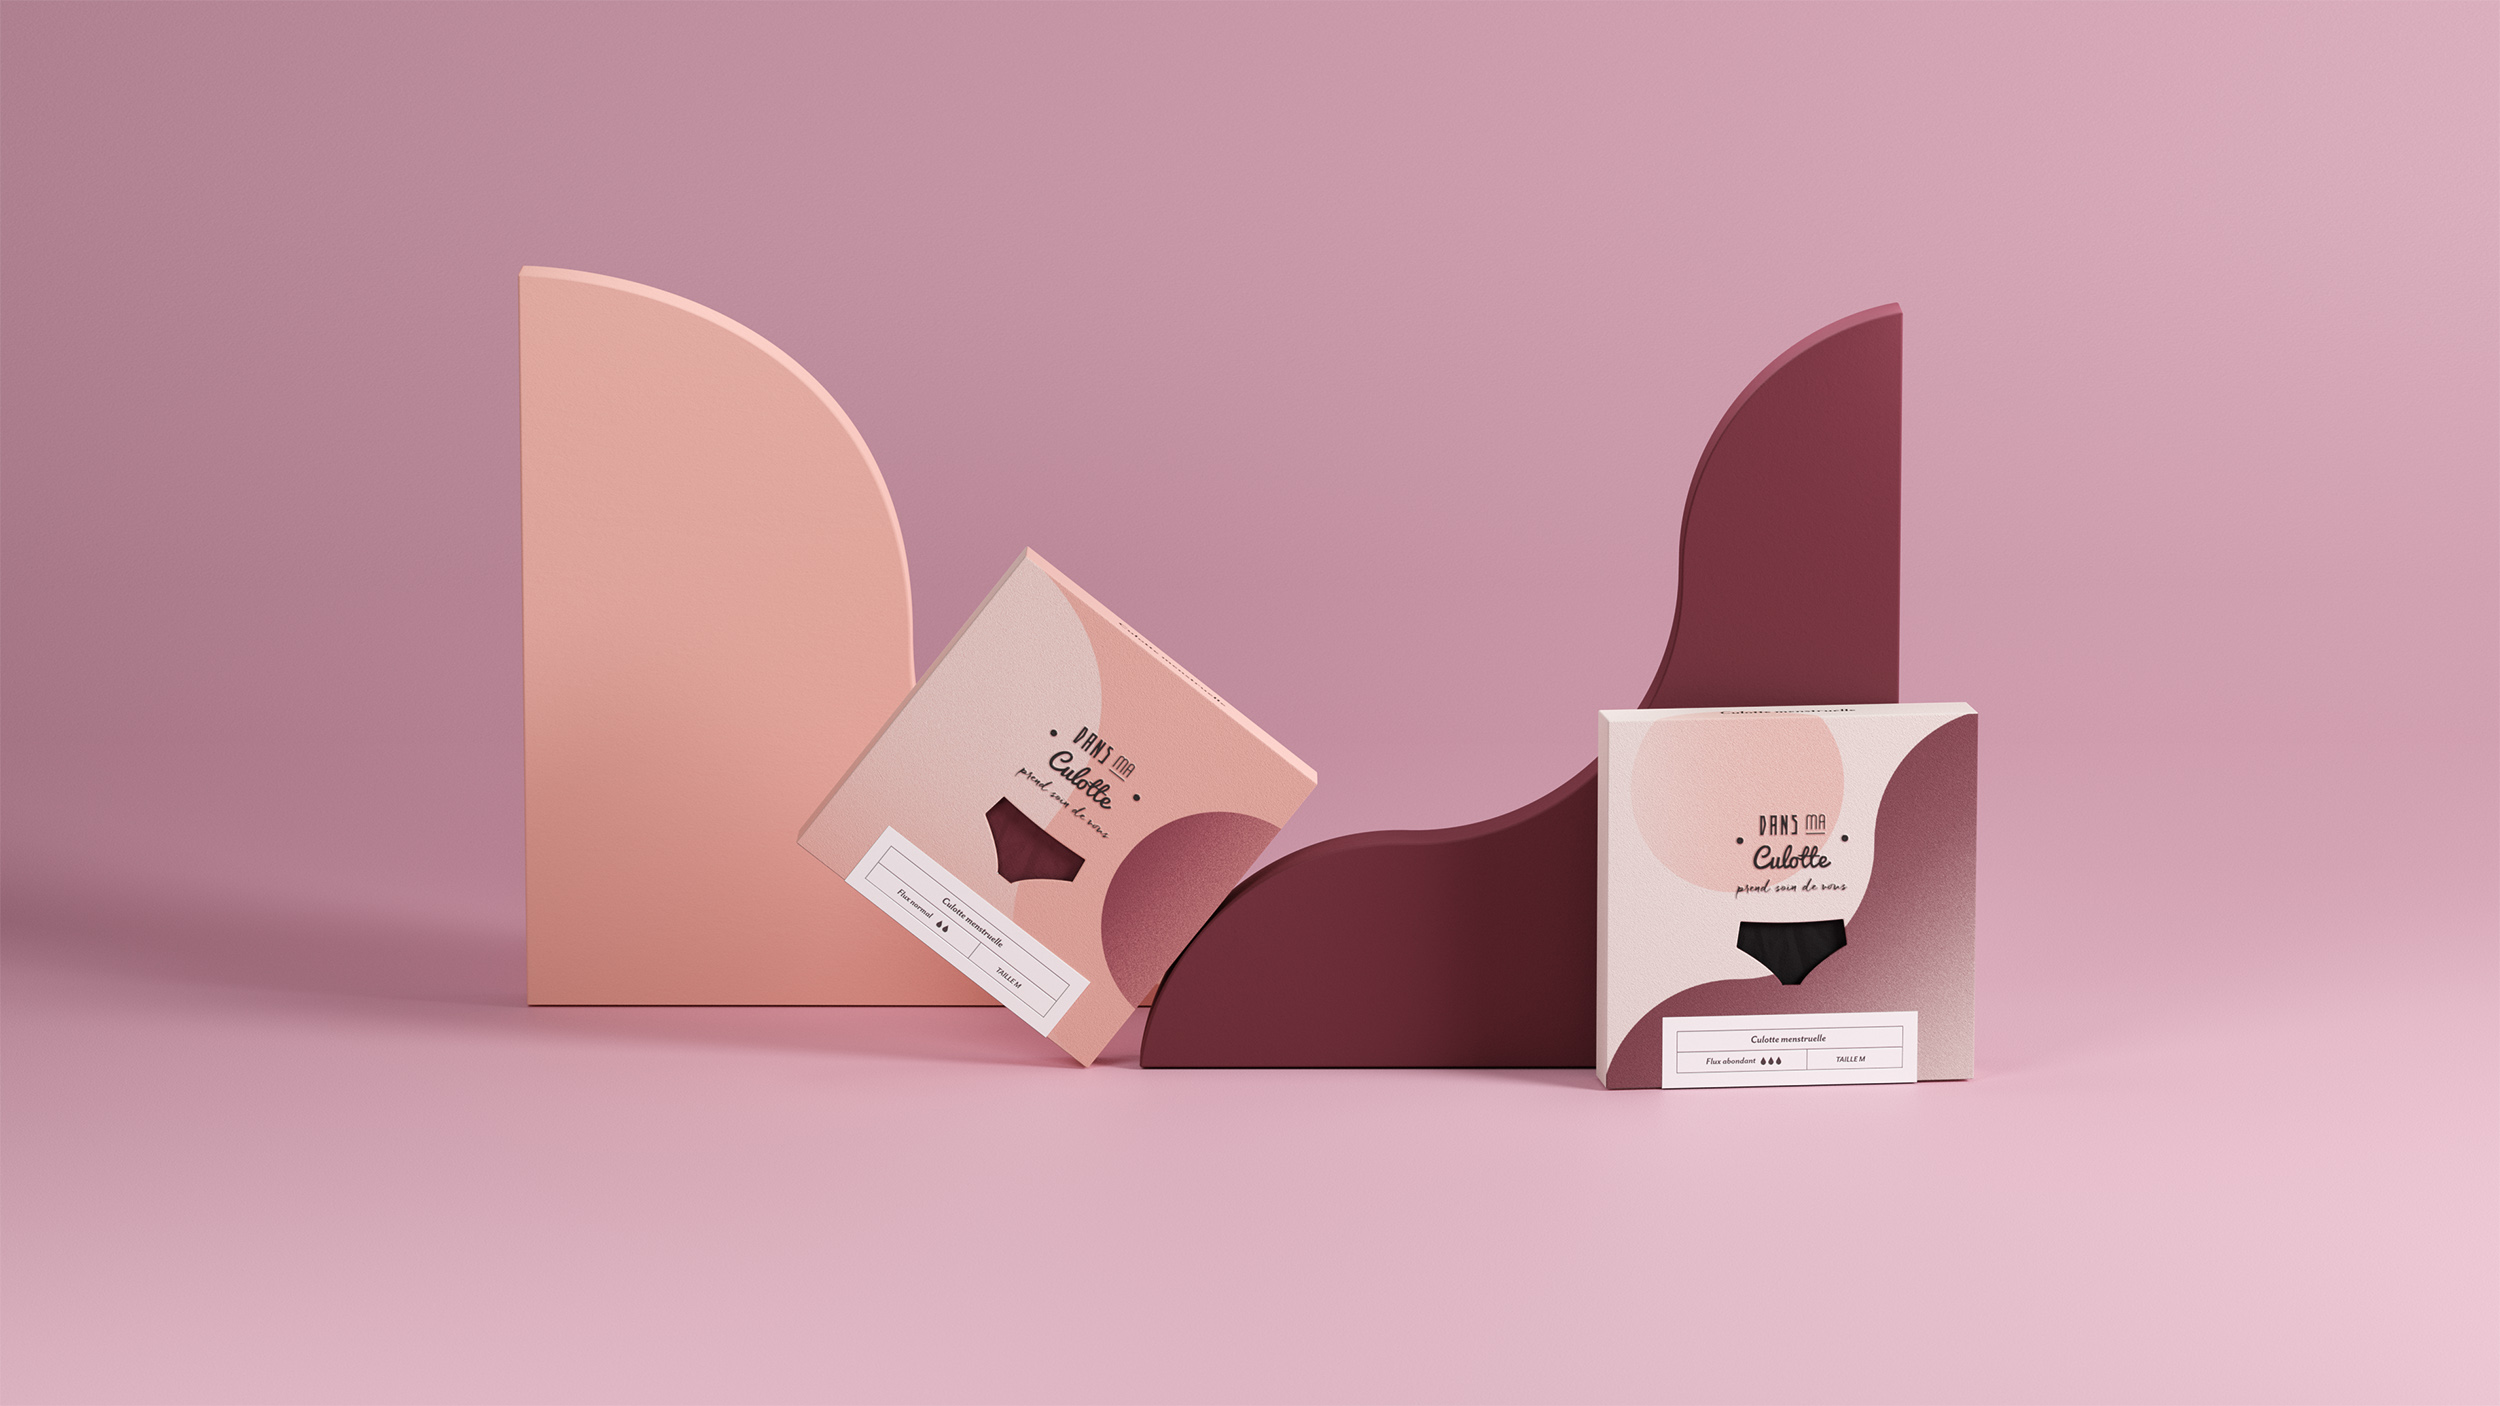 Chloé Camille Creates Packaging Design for Dans Ma Culotte